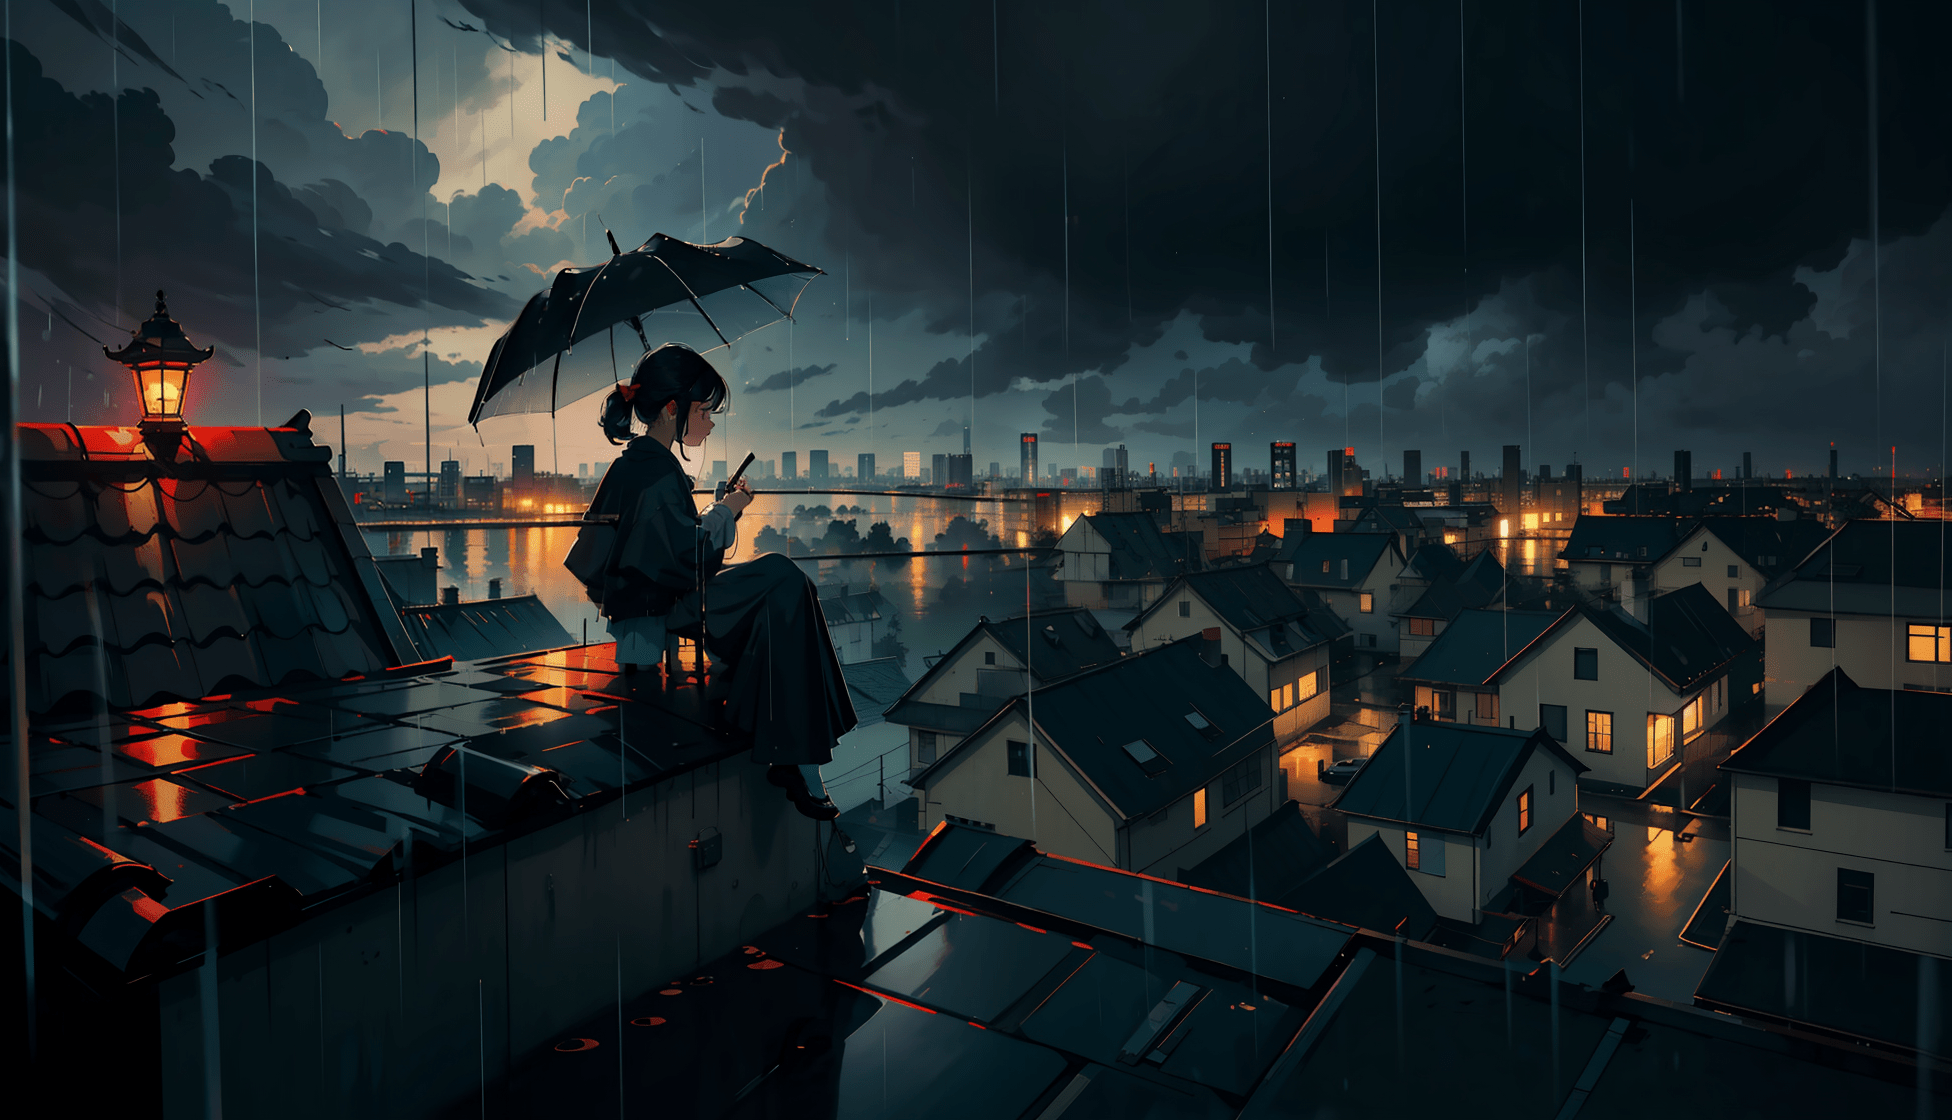 A girl with a black umbrella sits on a rooftop - Rain